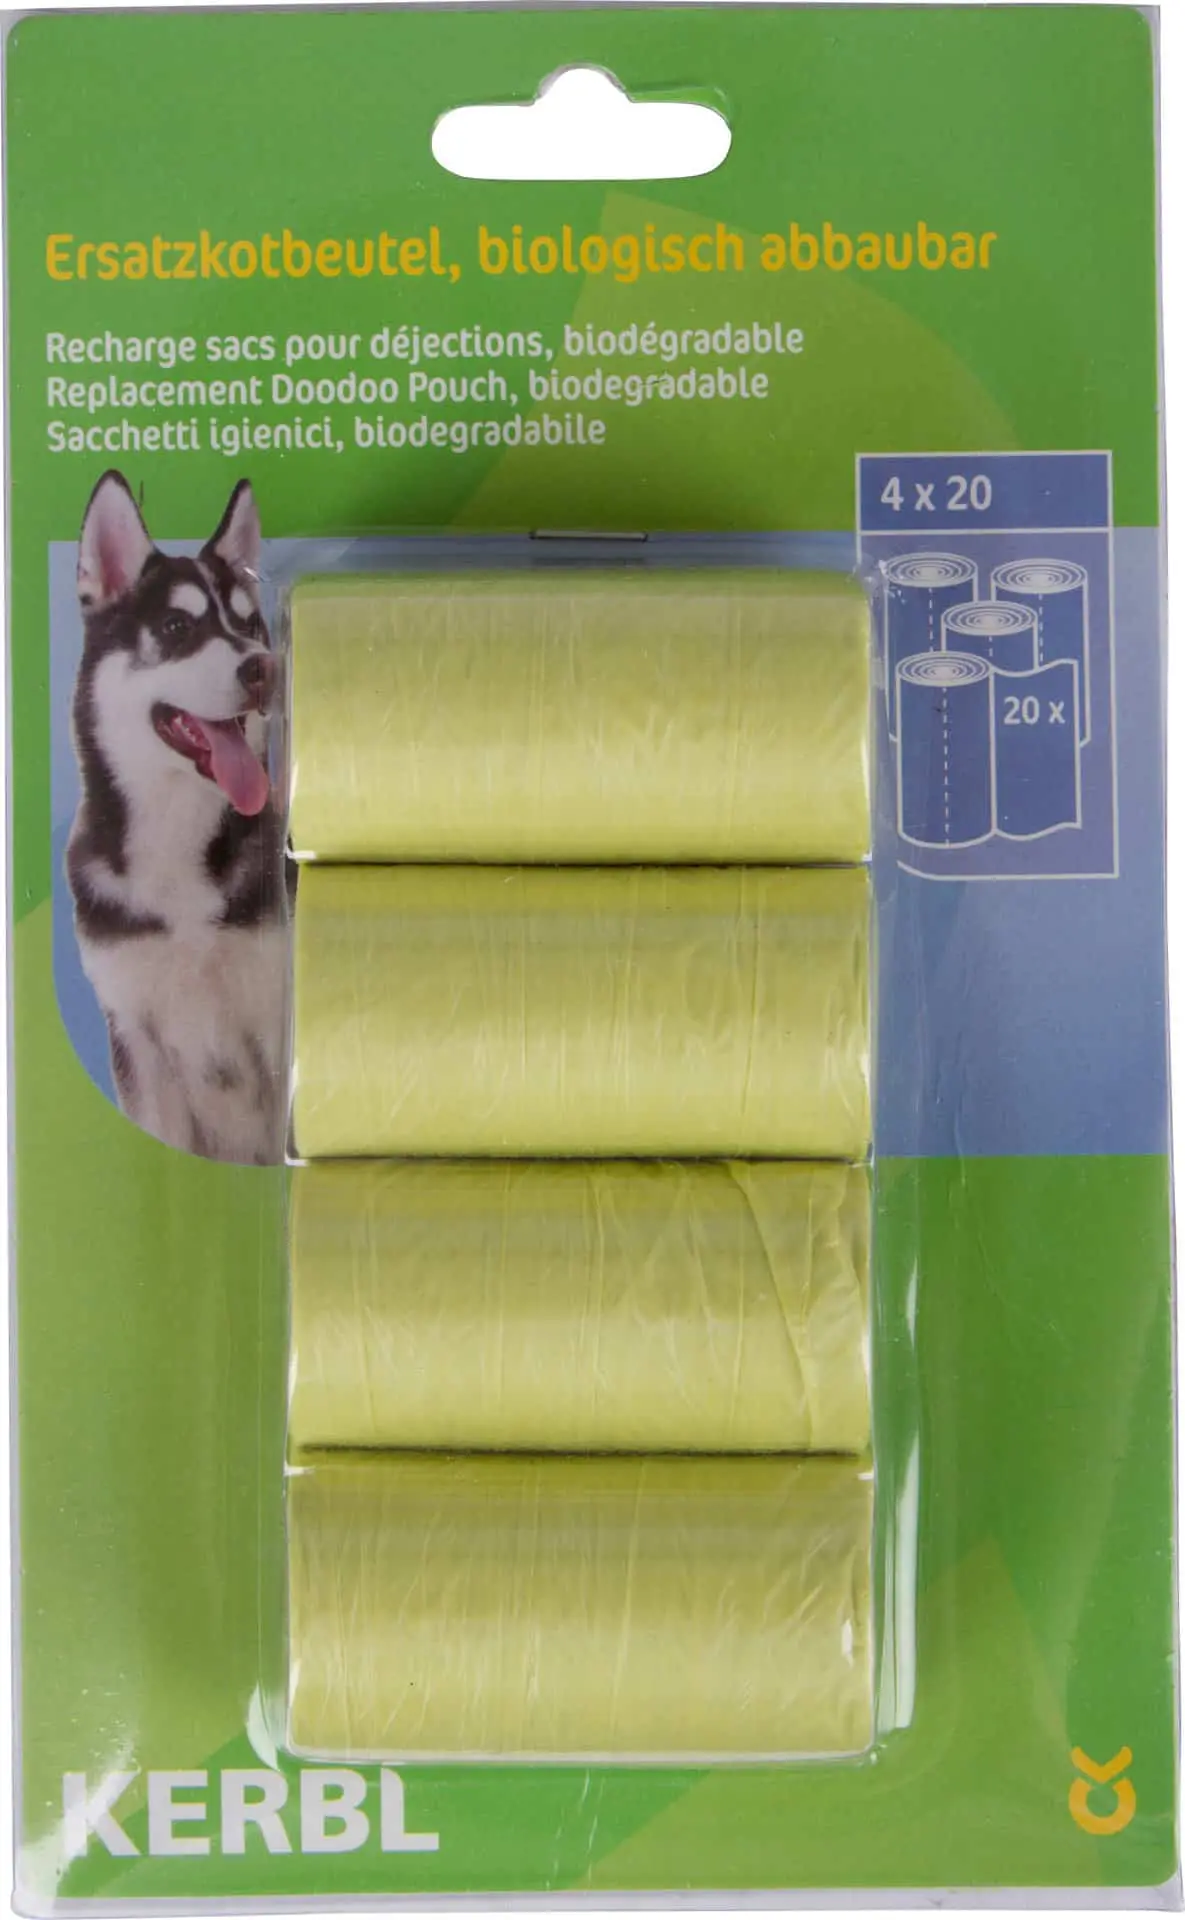 Replacement doodoo pouch, green, biodegradable